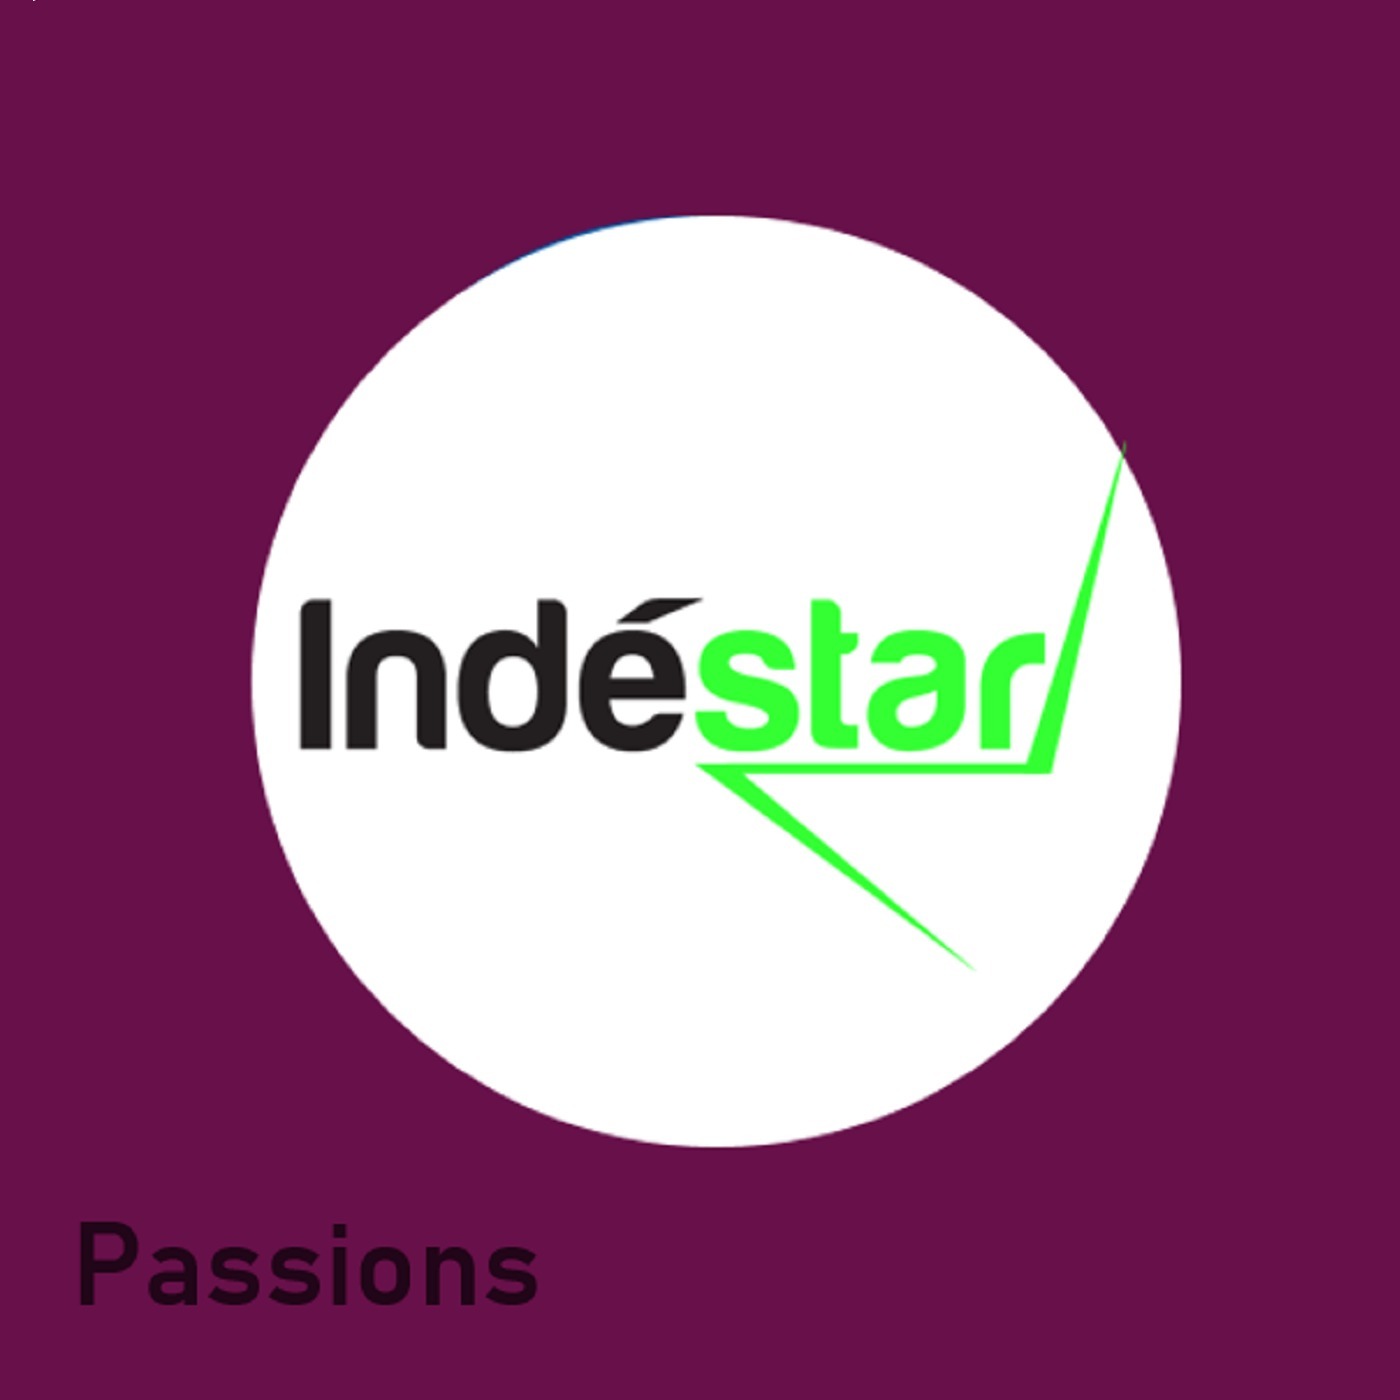 INDESTAR – Passions